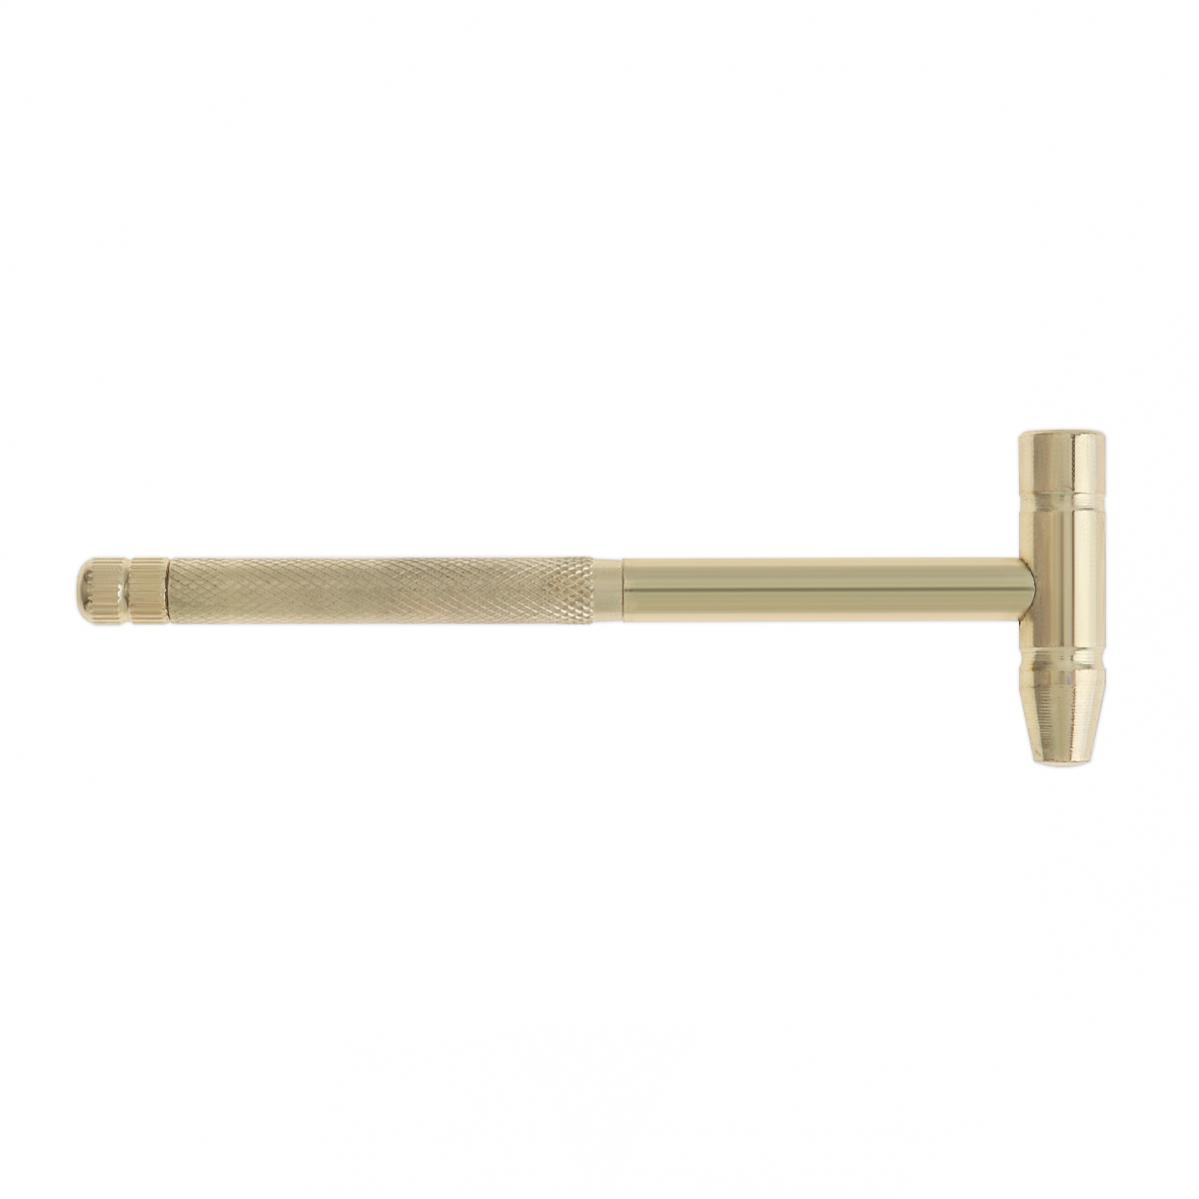 Brass Hammer 5-in-1 Mini Hammer Copper Plated Hammer With Screwdriver  Multi-function Golden Tool Hardware Tools Screwdriver1pcs)